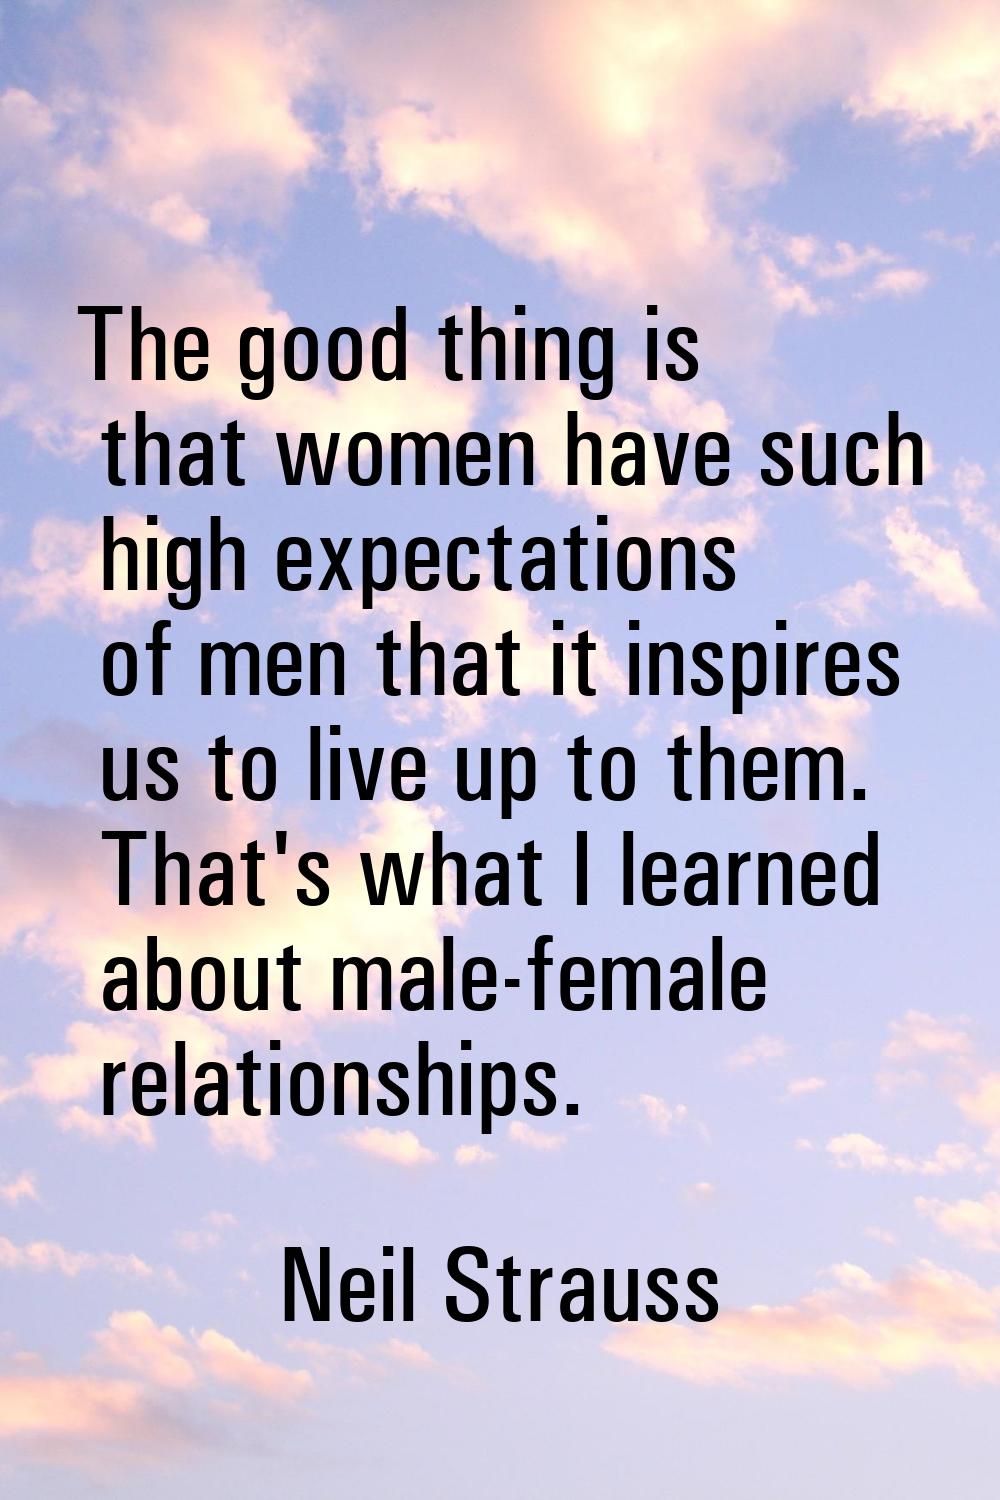 The good thing is that women have such high expectations of men that it inspires us to live up to t